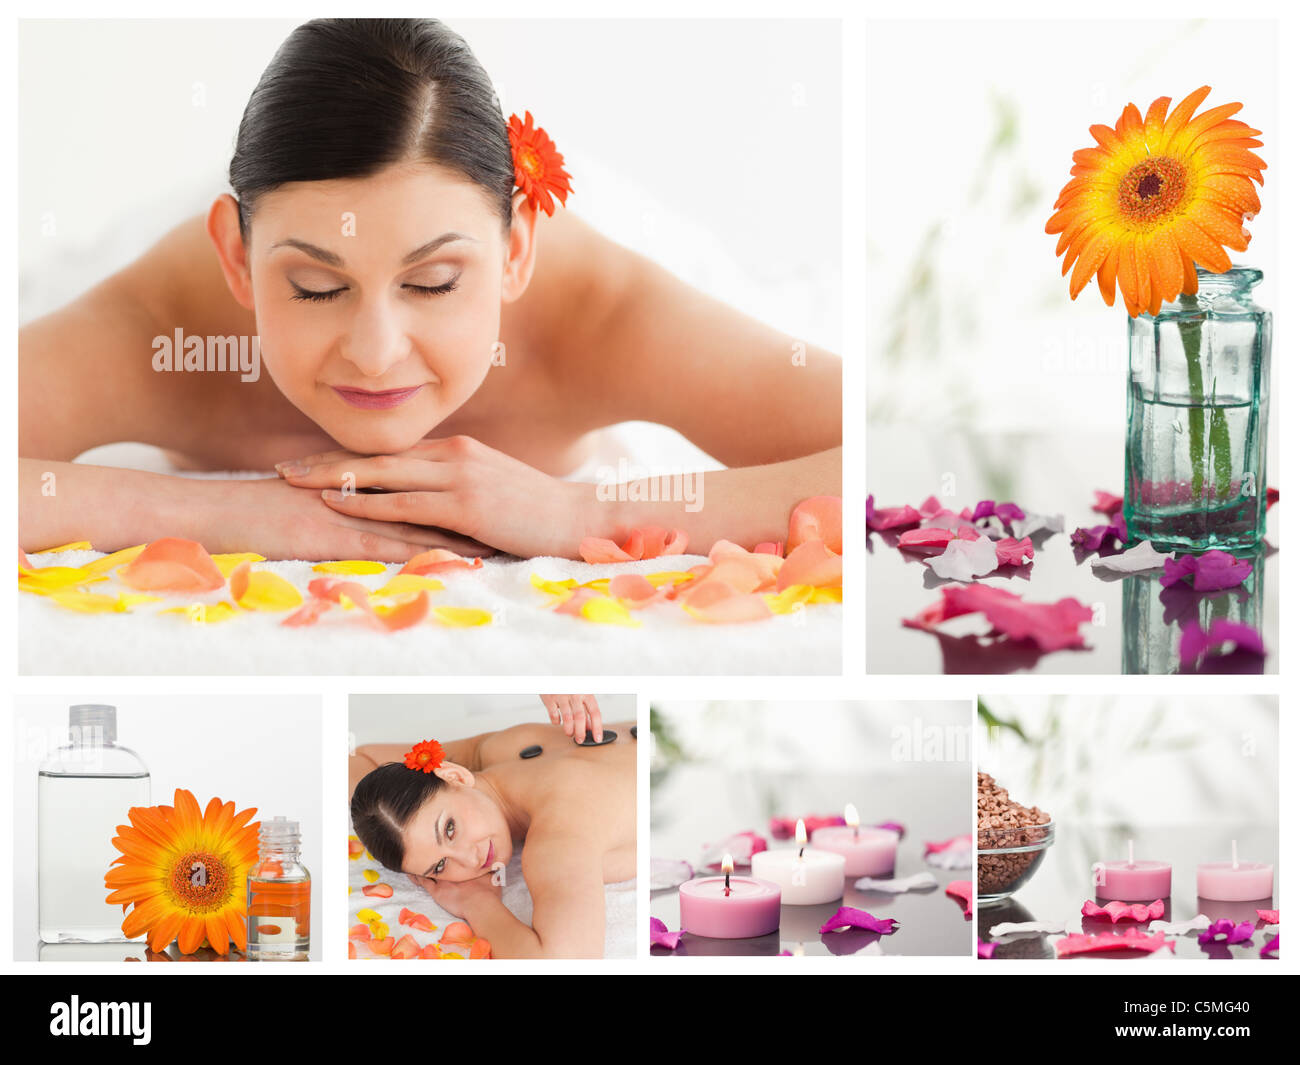 Collage of a beautiful woman relaxing while receiving a massage Stock Photo